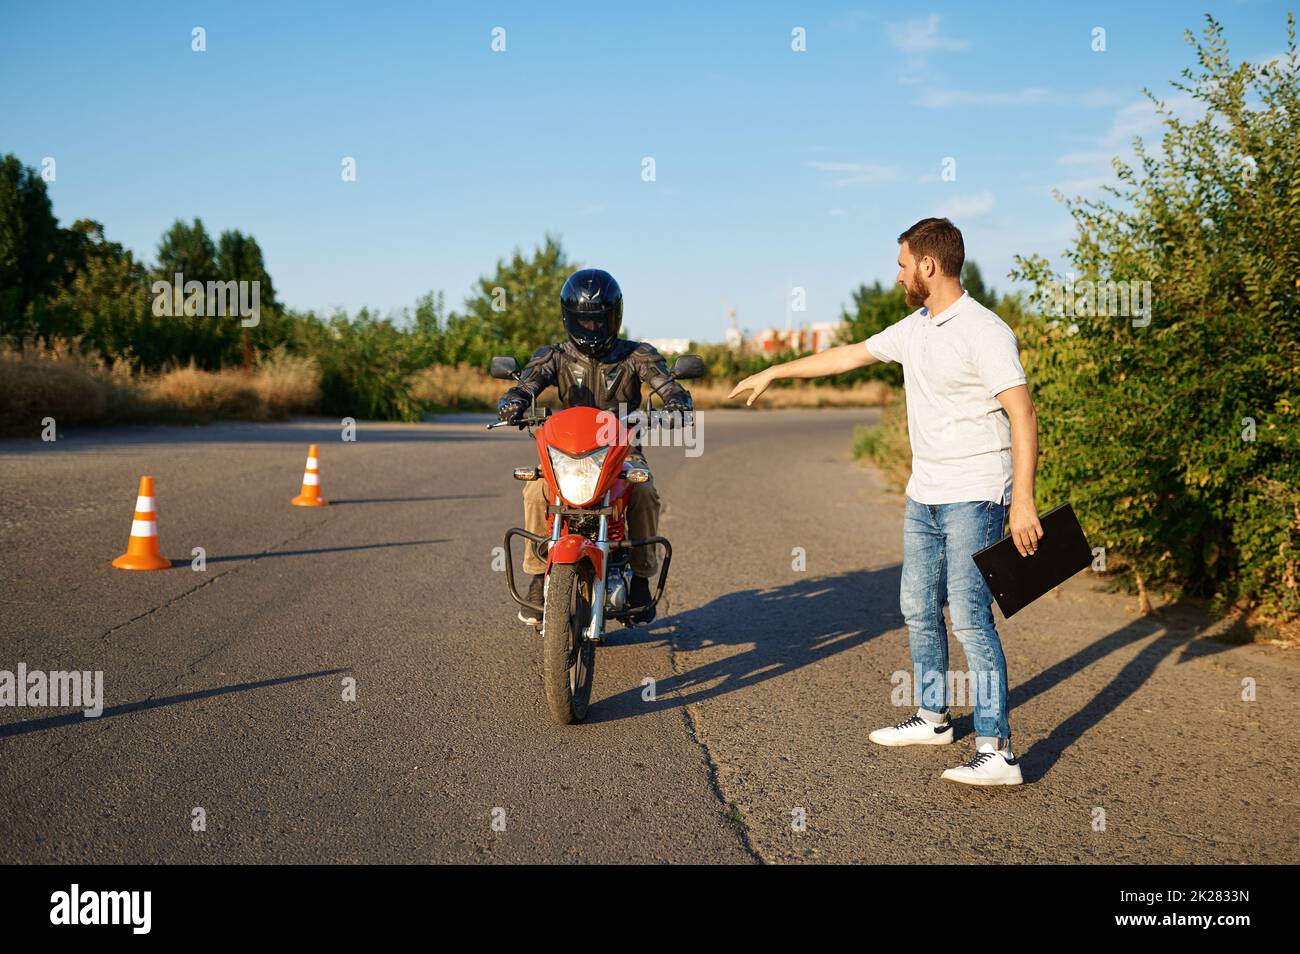 Driving course on motordrome, motorcycle school Stock Photo